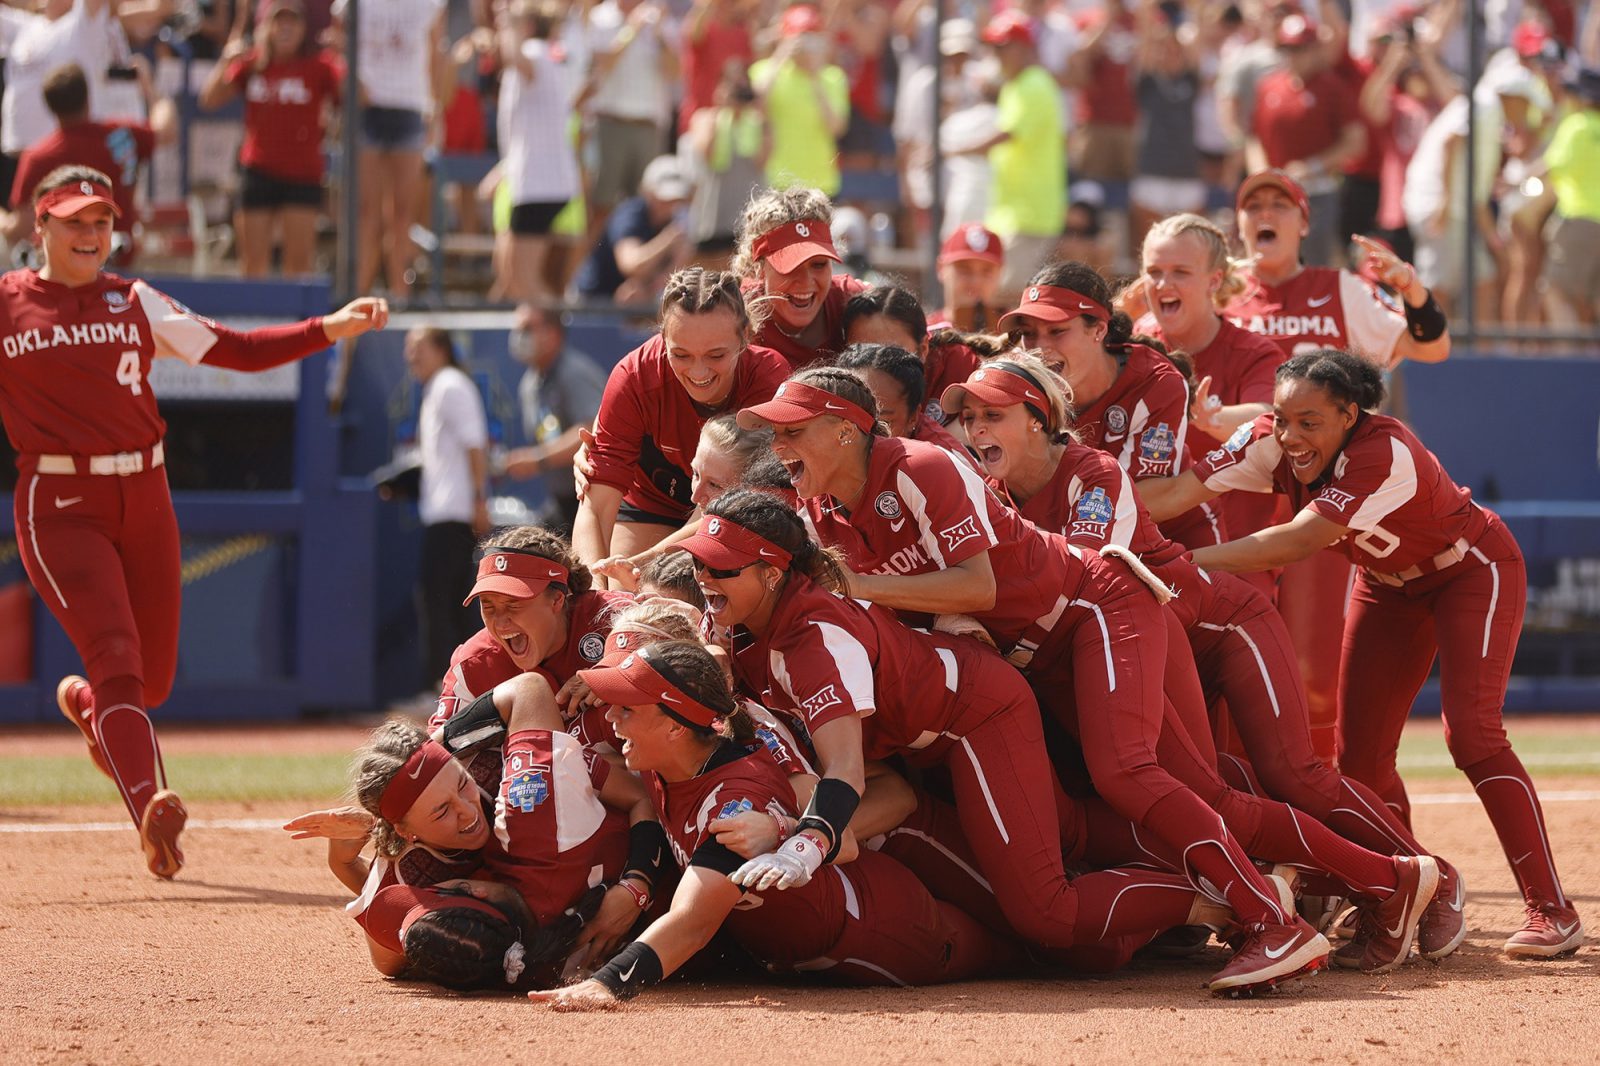 For these Sooners, joy is not a consequence of winning. It’s the other way around.